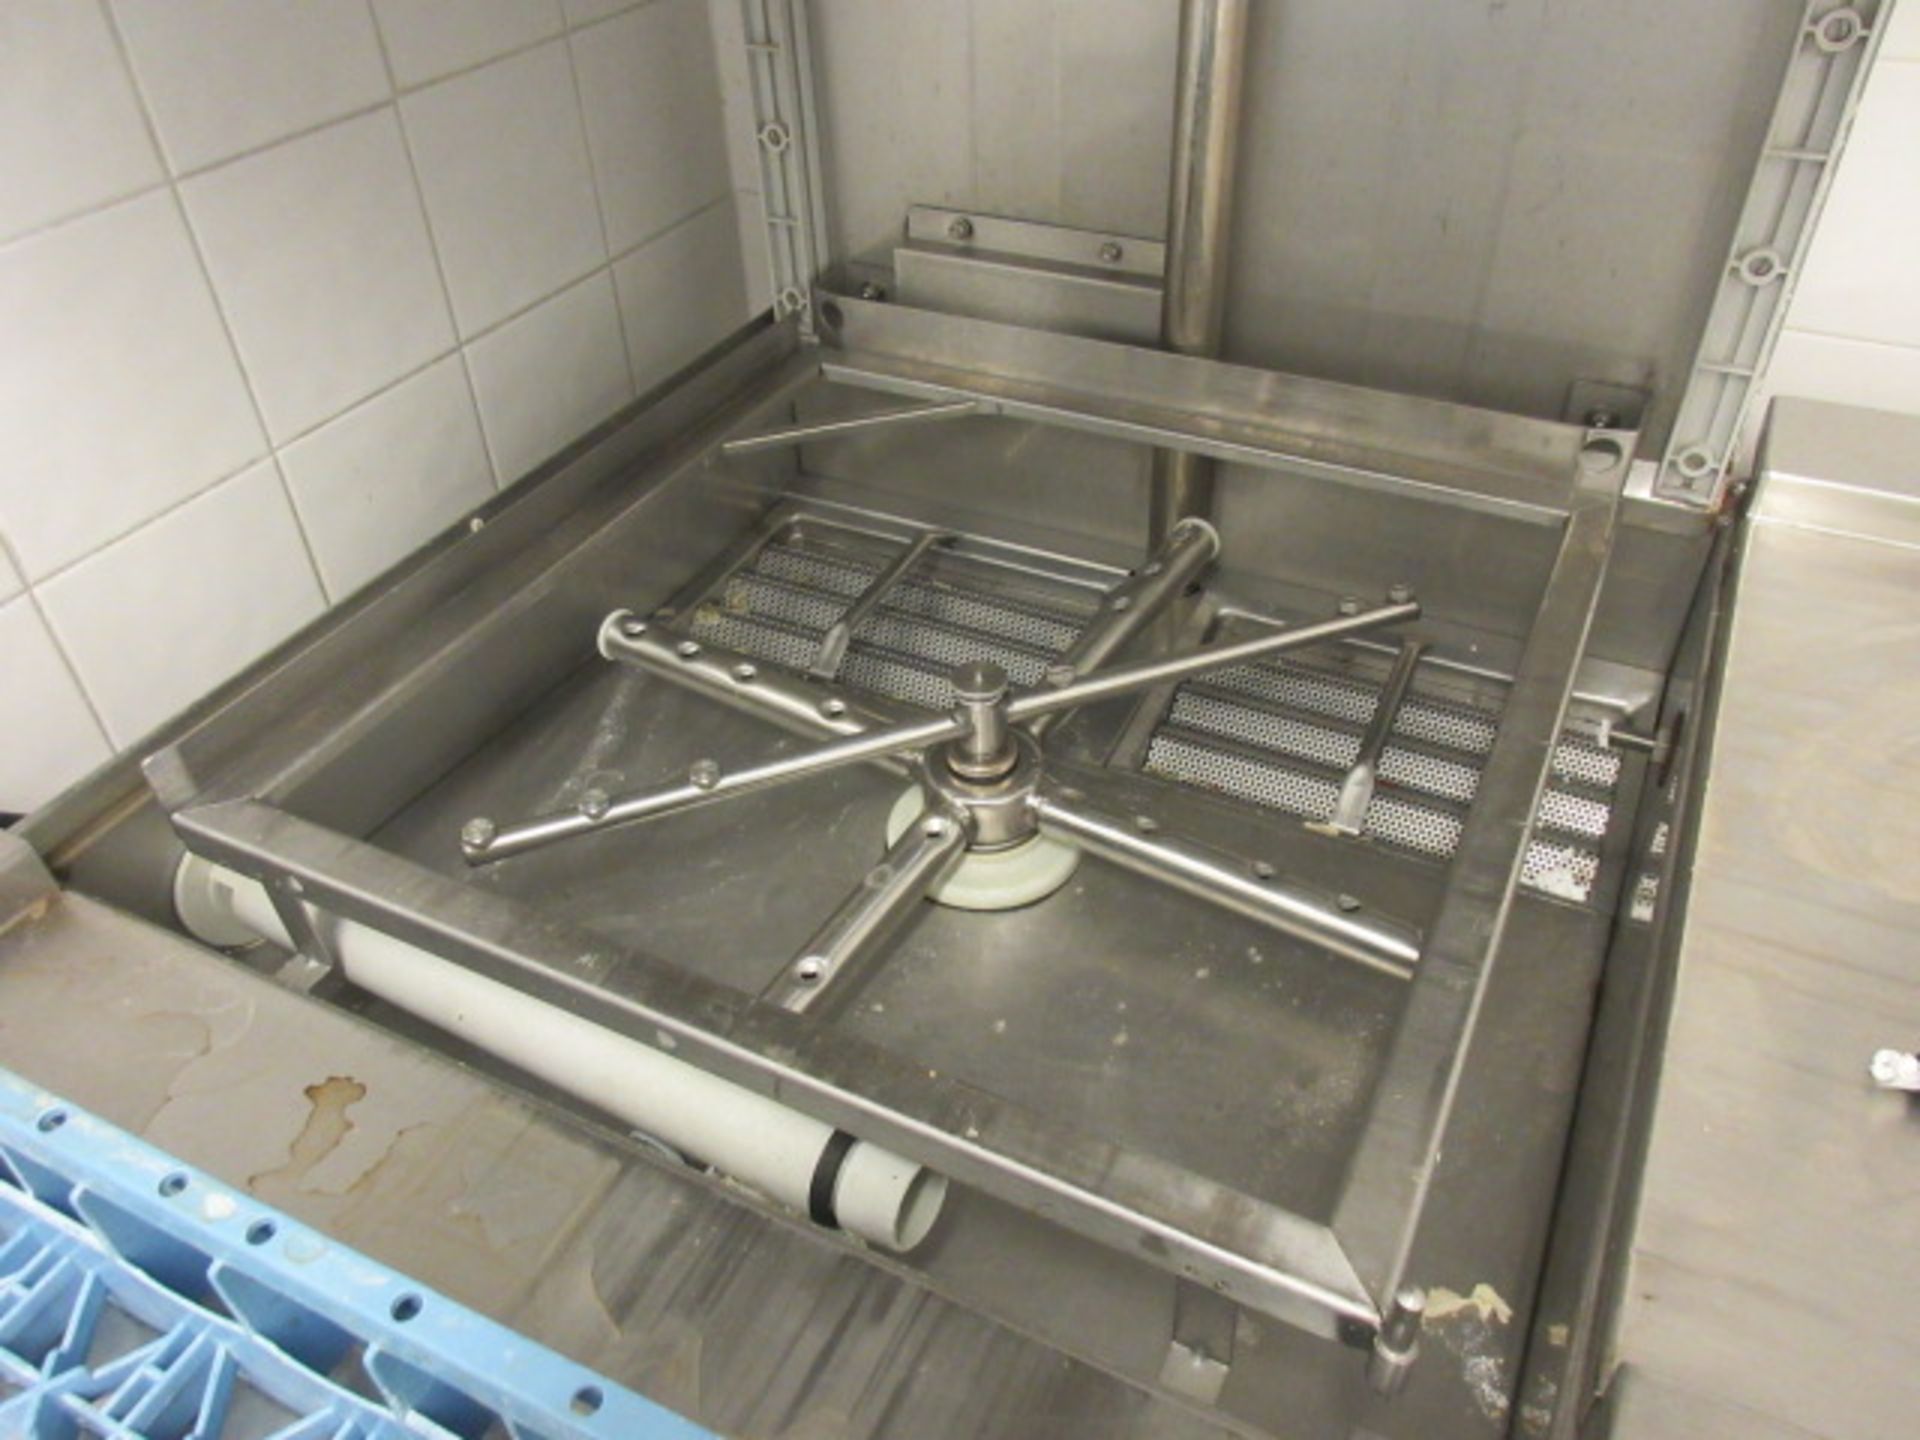 COMENDA C155 GLASS WASHER, INFEED DRAIN BOARD WITH A WASH FOOD MACHINATOR, SINK WITH FLEXI WASH - Image 4 of 5